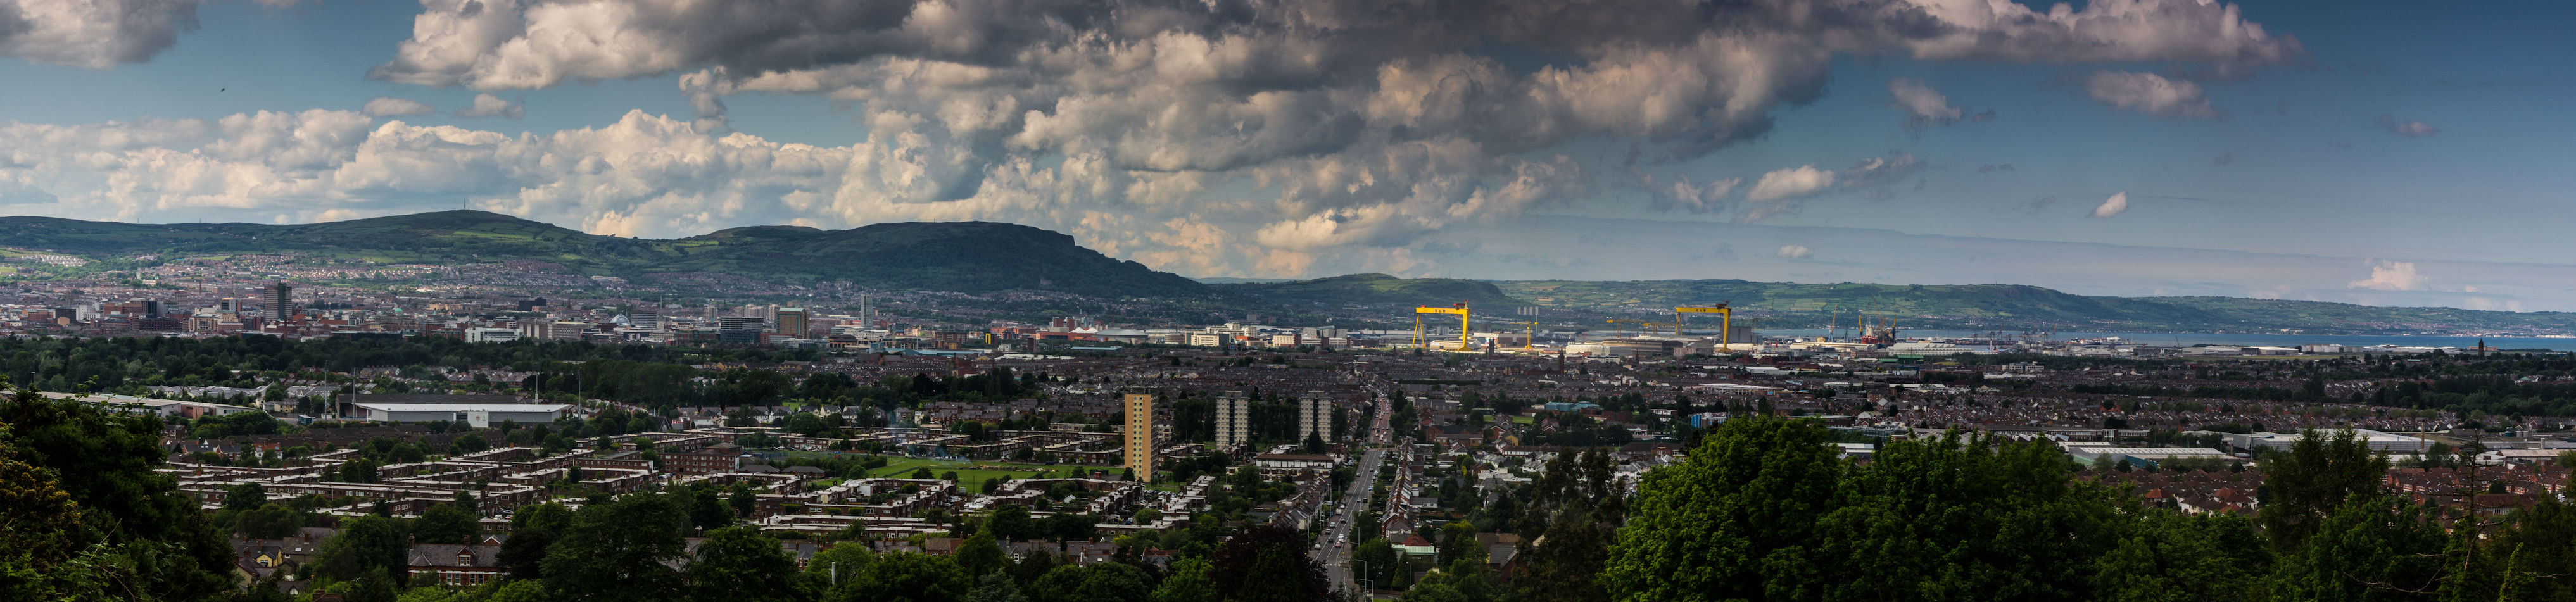 Belfast, NI's capital and largest city